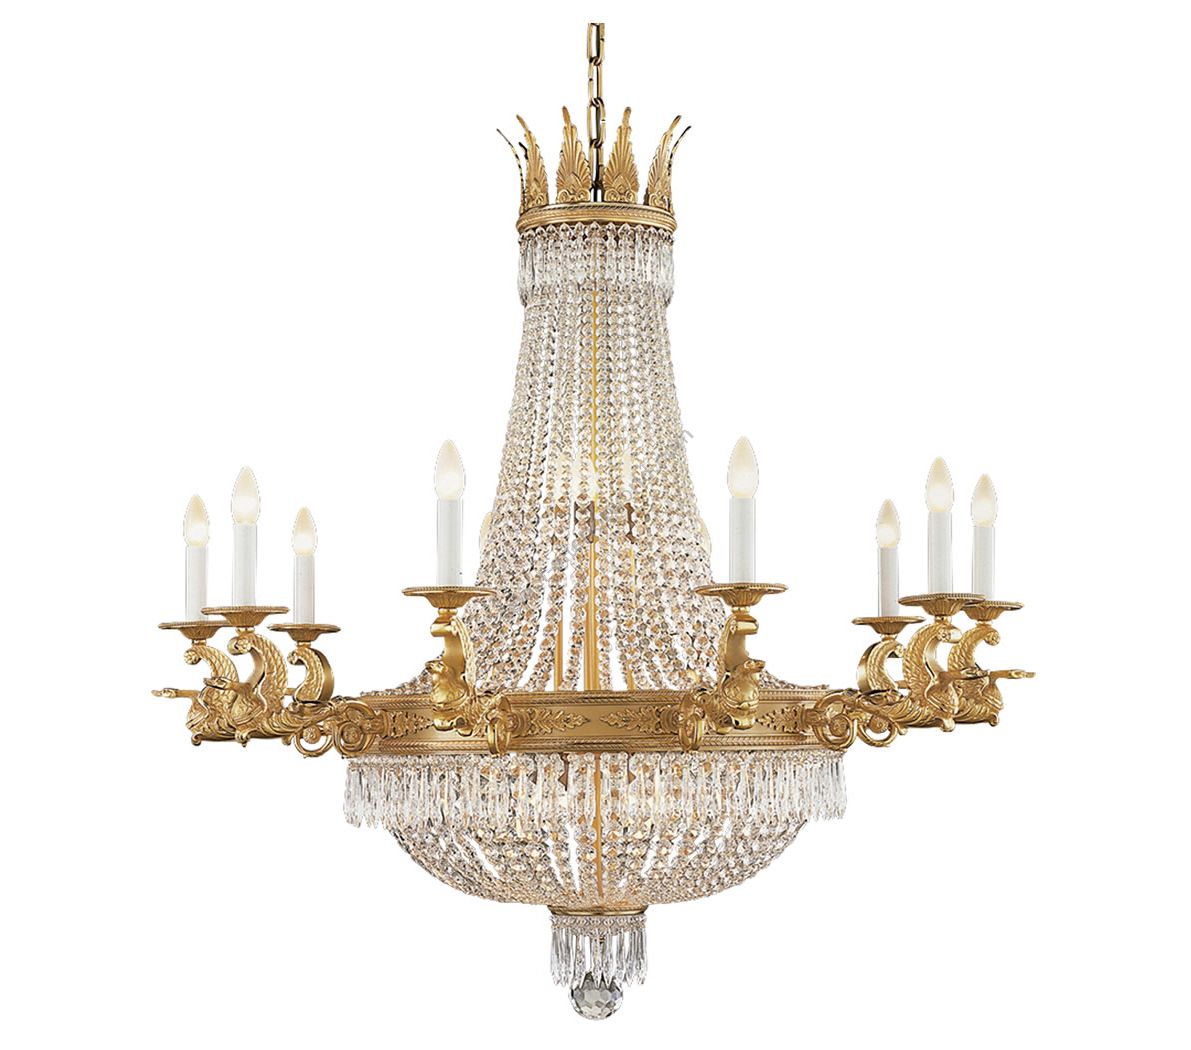 Mariner / Luxury Scholer Crystal Chandelier, Empire French Style / 18761